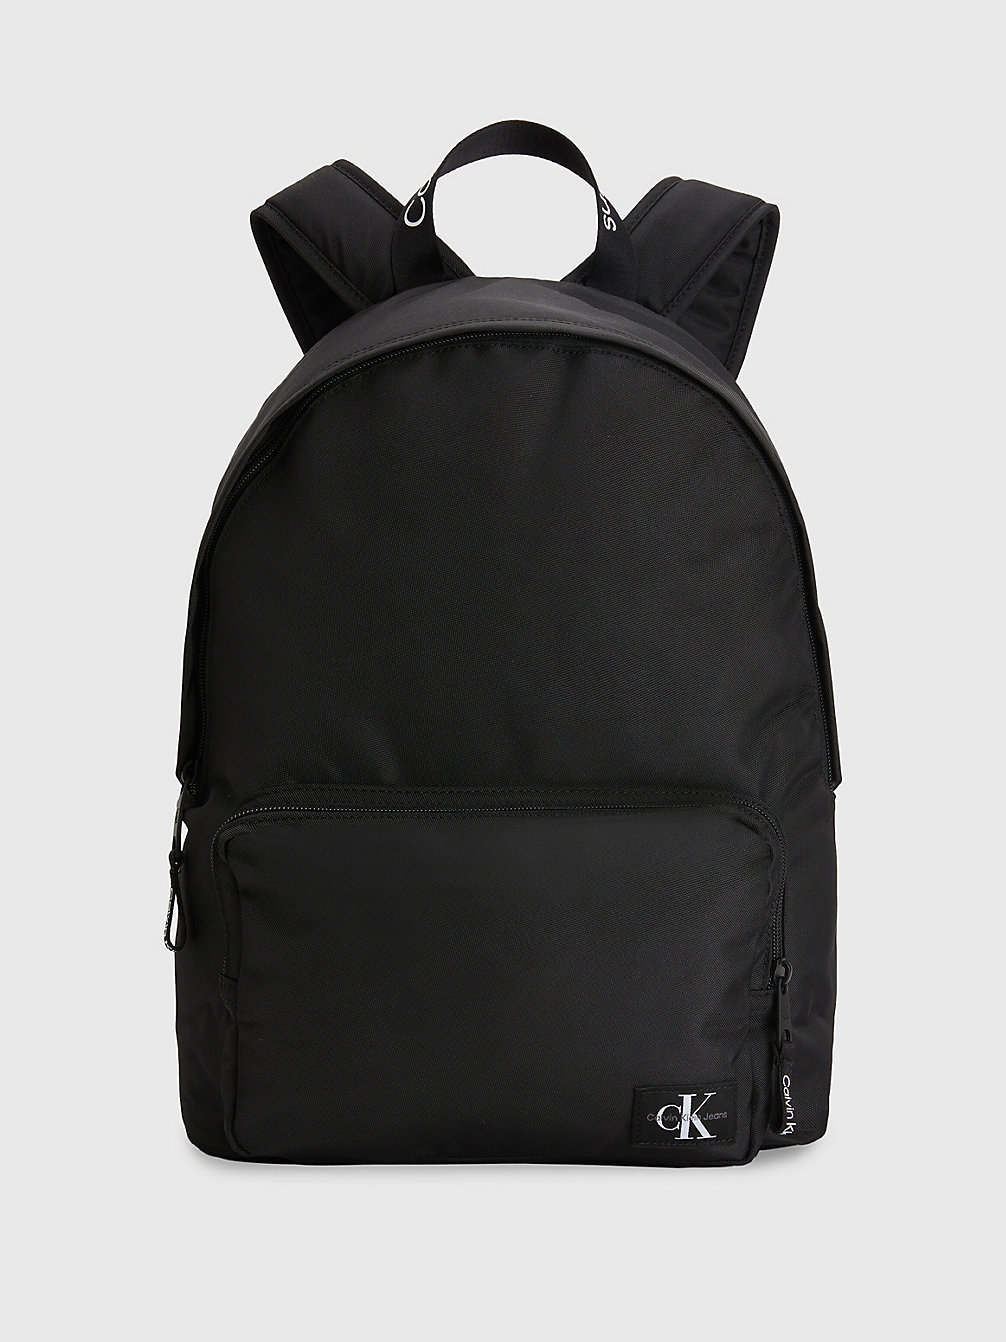 BLACK Recycled Round Backpack undefined men Calvin Klein